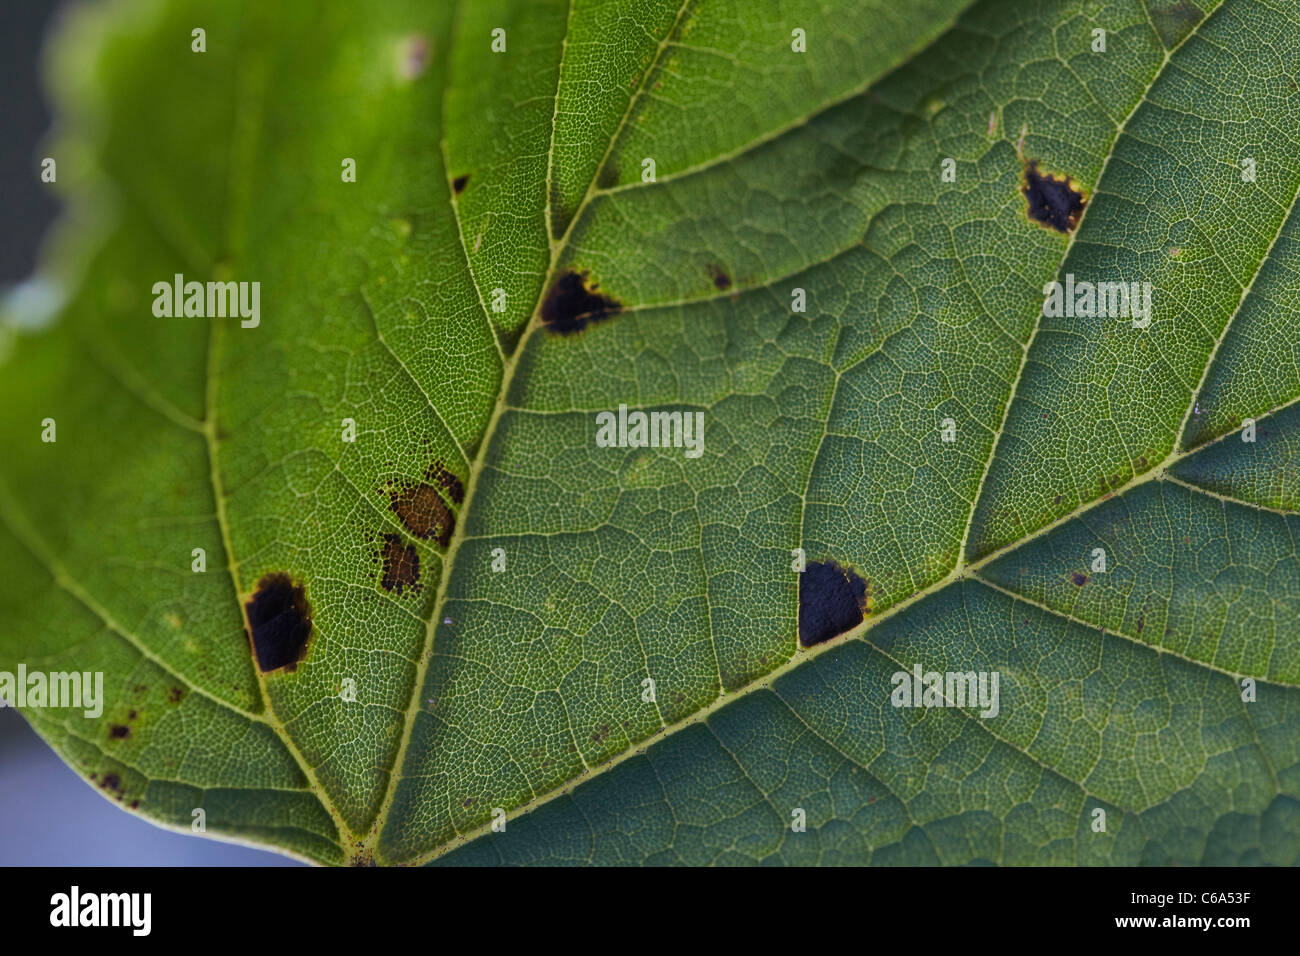 Tar spots on a Sycamore, Acer pseudoplatanus leaf caused by the fungus Rhytisma acerinum Stock Photo